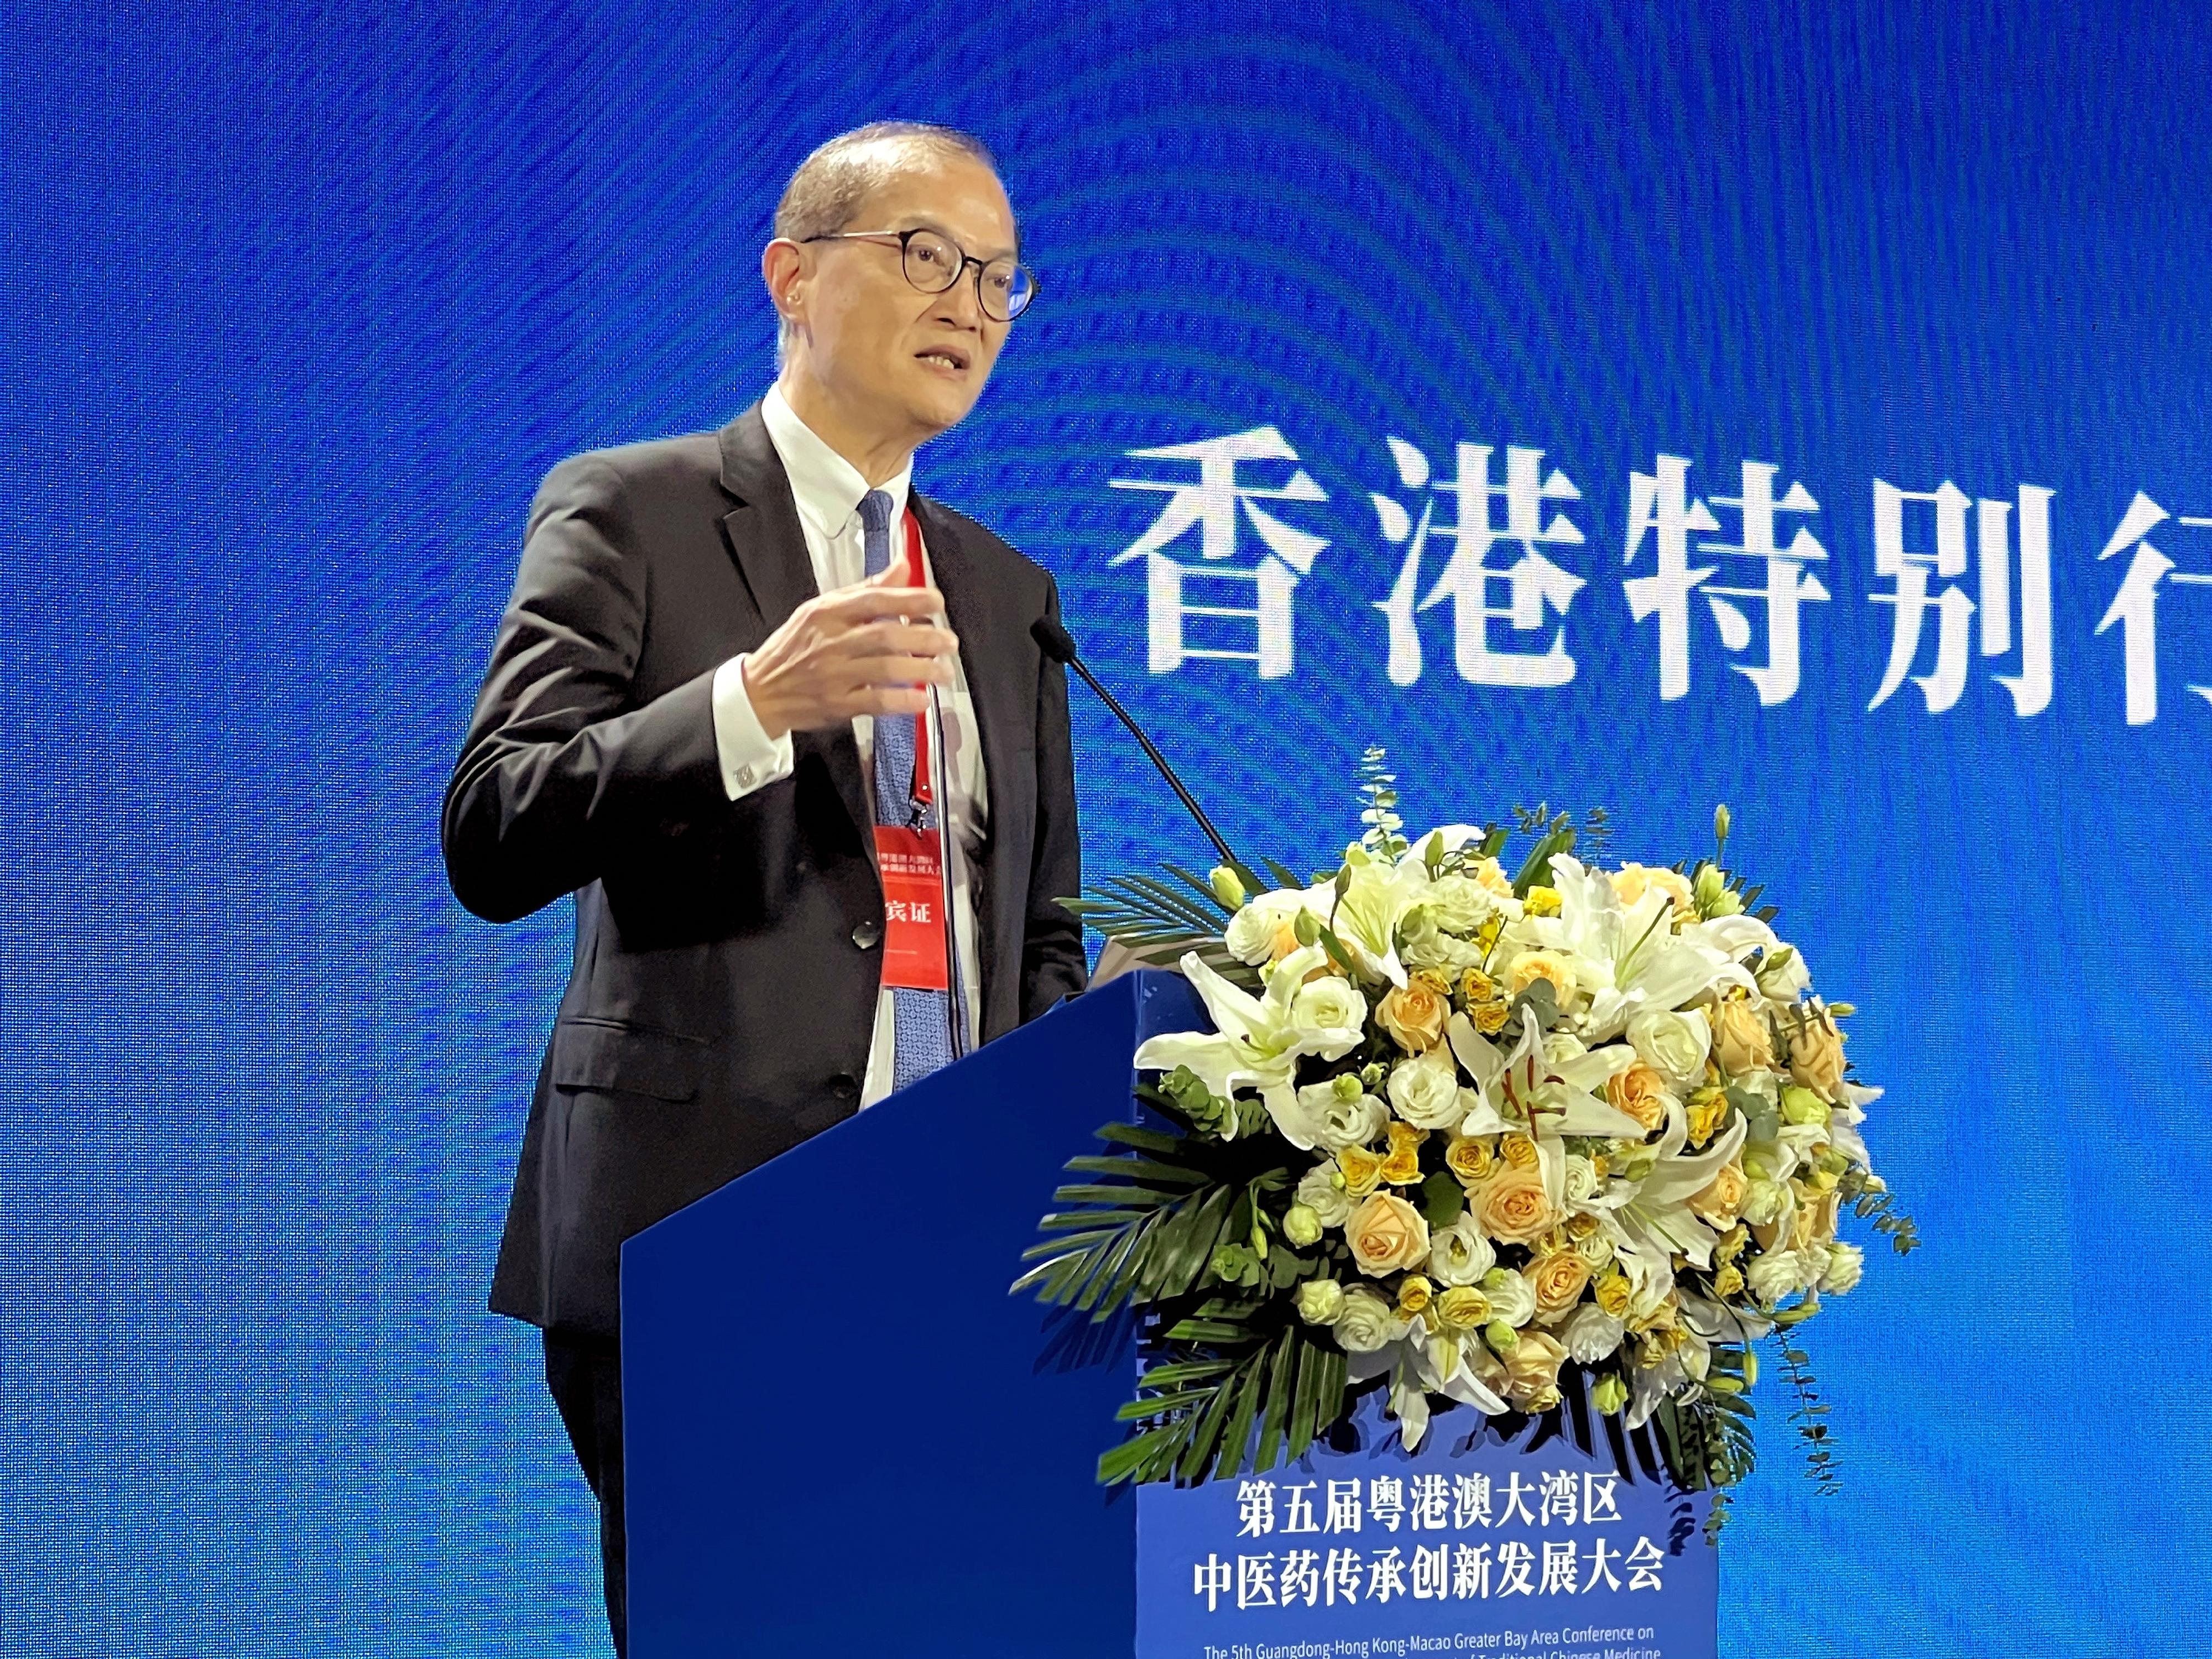 The Secretary for Health, Professor Lo Chung-mau, delivers a speech at the opening ceremony of the 5th Guangdong-Hong Kong-Macao Greater Bay Area Conference on Inheritance, Innovation and Development of Traditional Chinese Medicine in Foshan today (September 14).